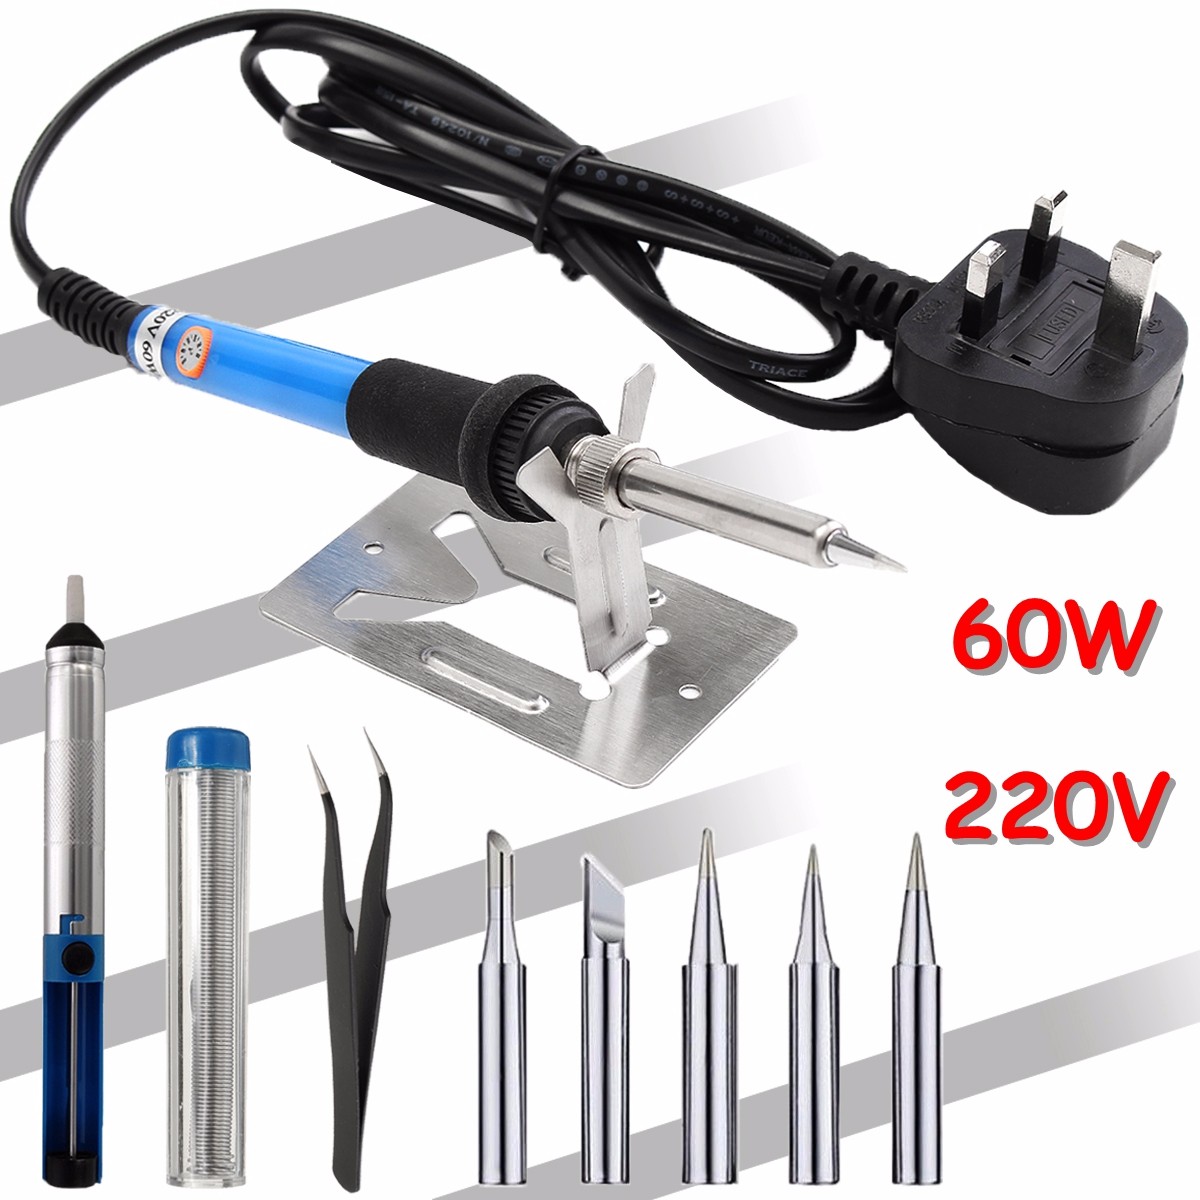 

6 in 1 60W 220V Adjustable Temperature Welding Soldering Iron with Holder + Tips